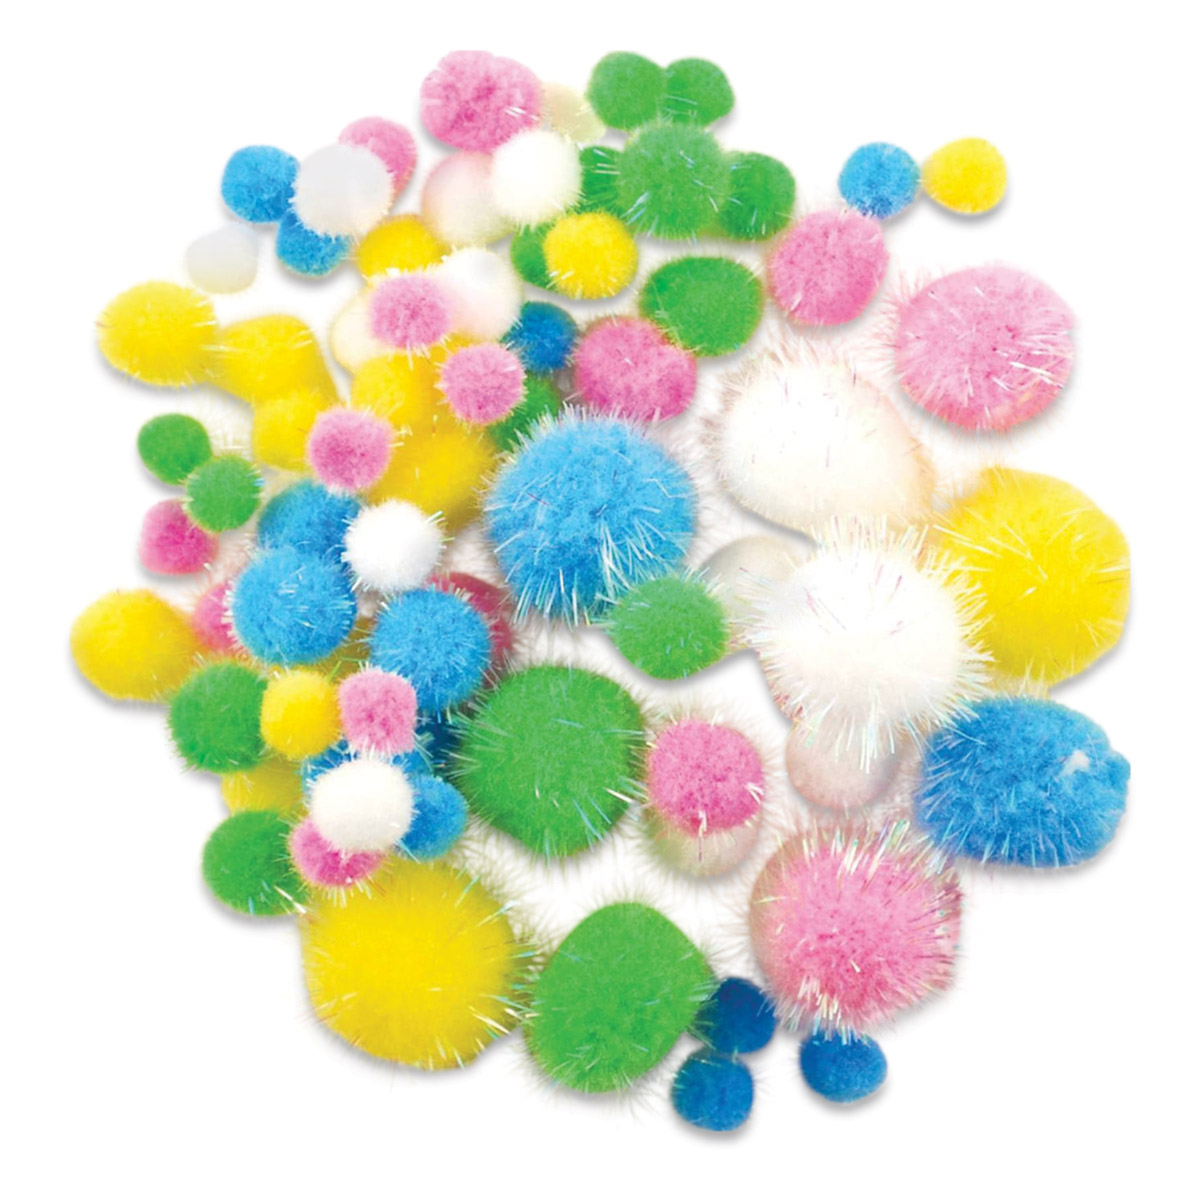 Glitter Pom Pom Poms With Tinsel Assorted Colors For DIY Craft